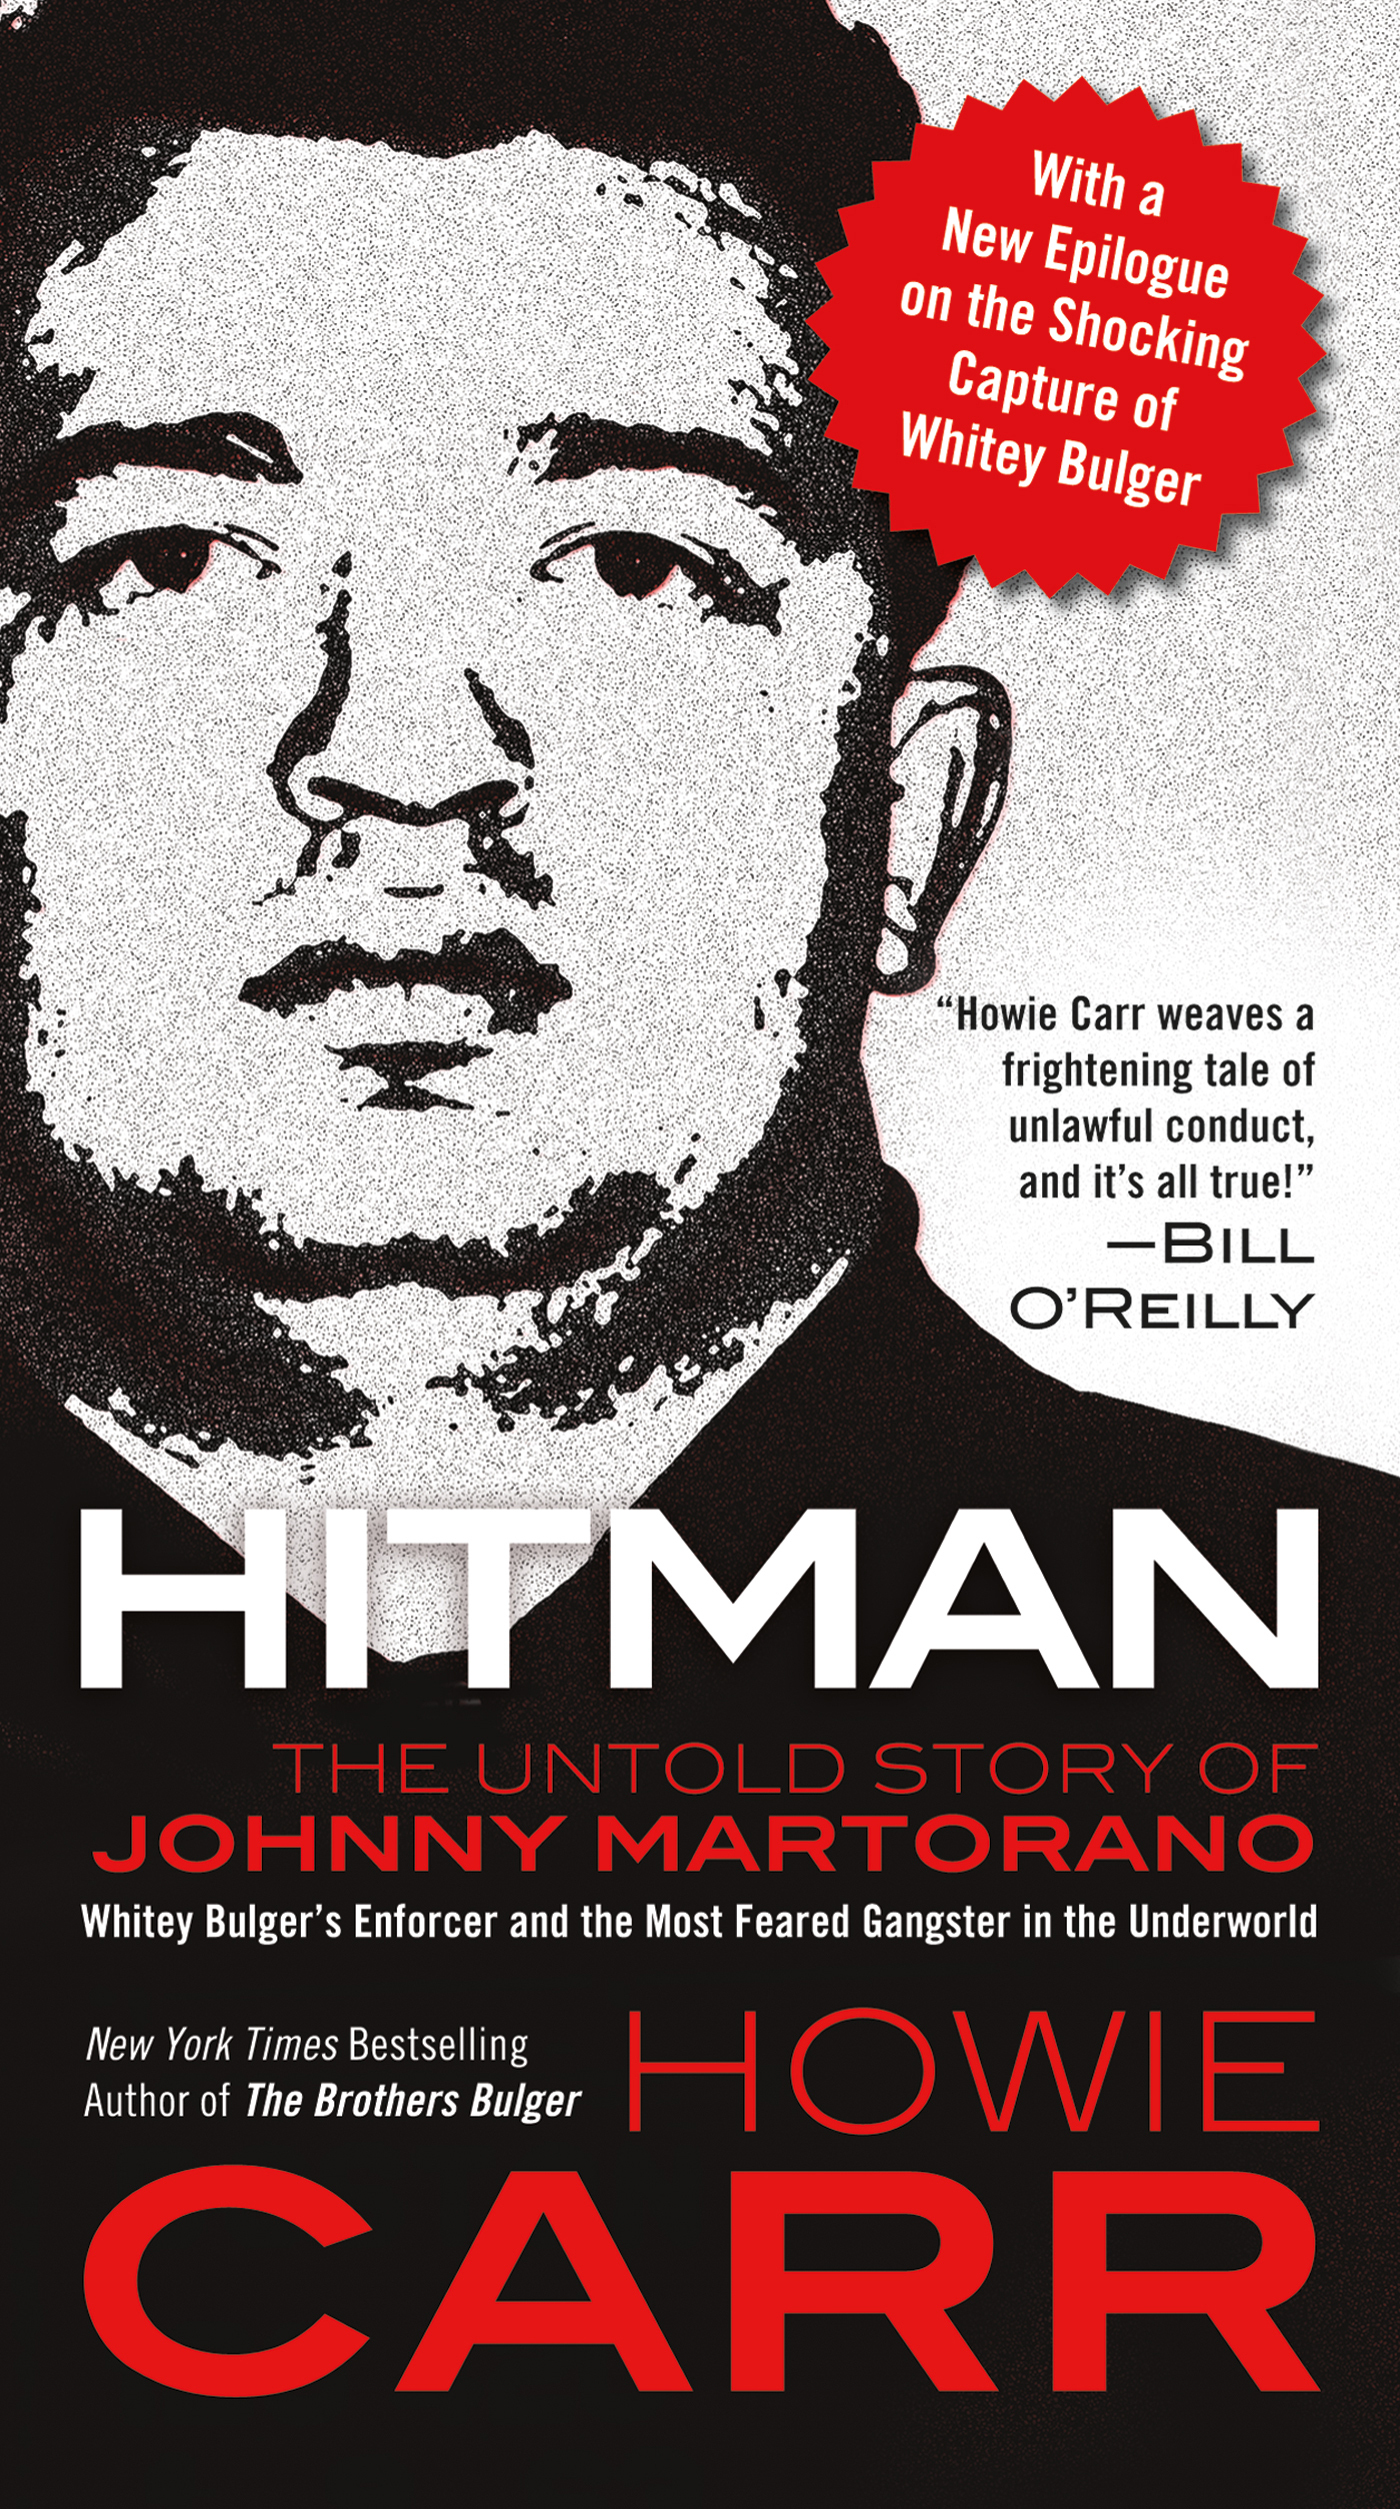 Hitman : The Untold Story of Johnny Martorano: Whitey Bulger's Enforcer and the Most Feared Gangster in the Underworld by Howie Carr